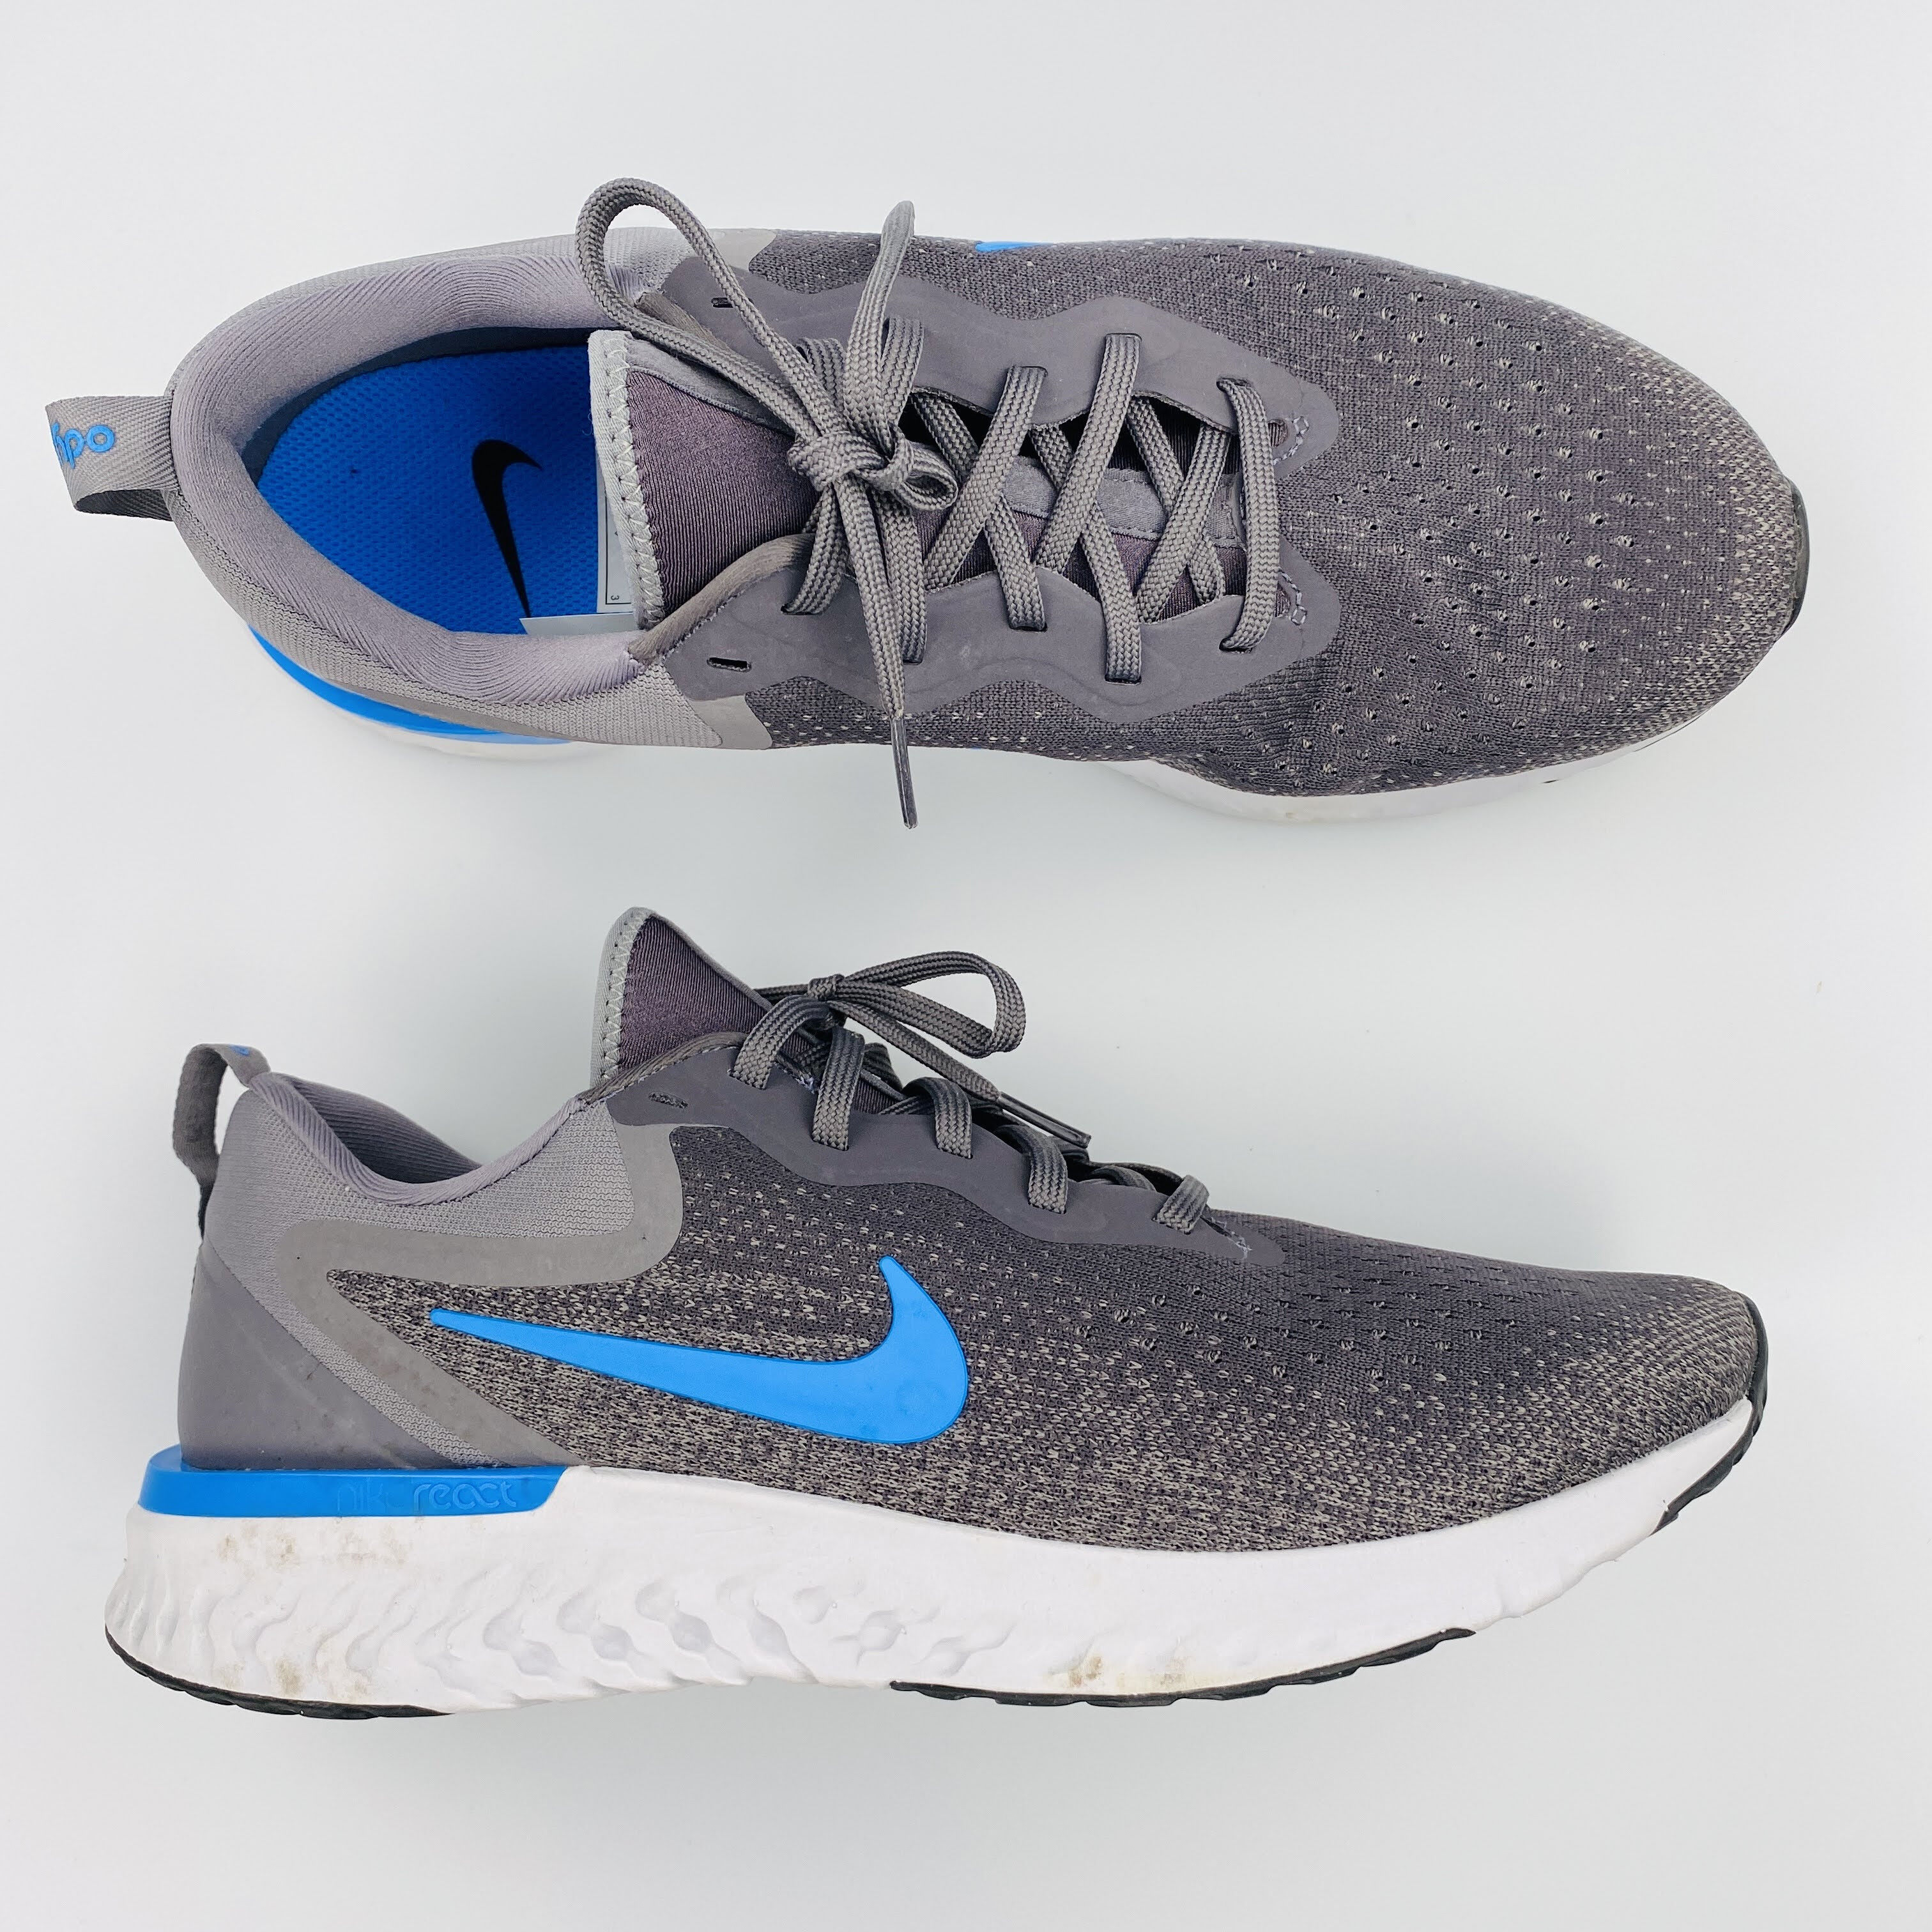 Nike Odyssey React - Second Hand Running shoes - Men's - Grey - 45